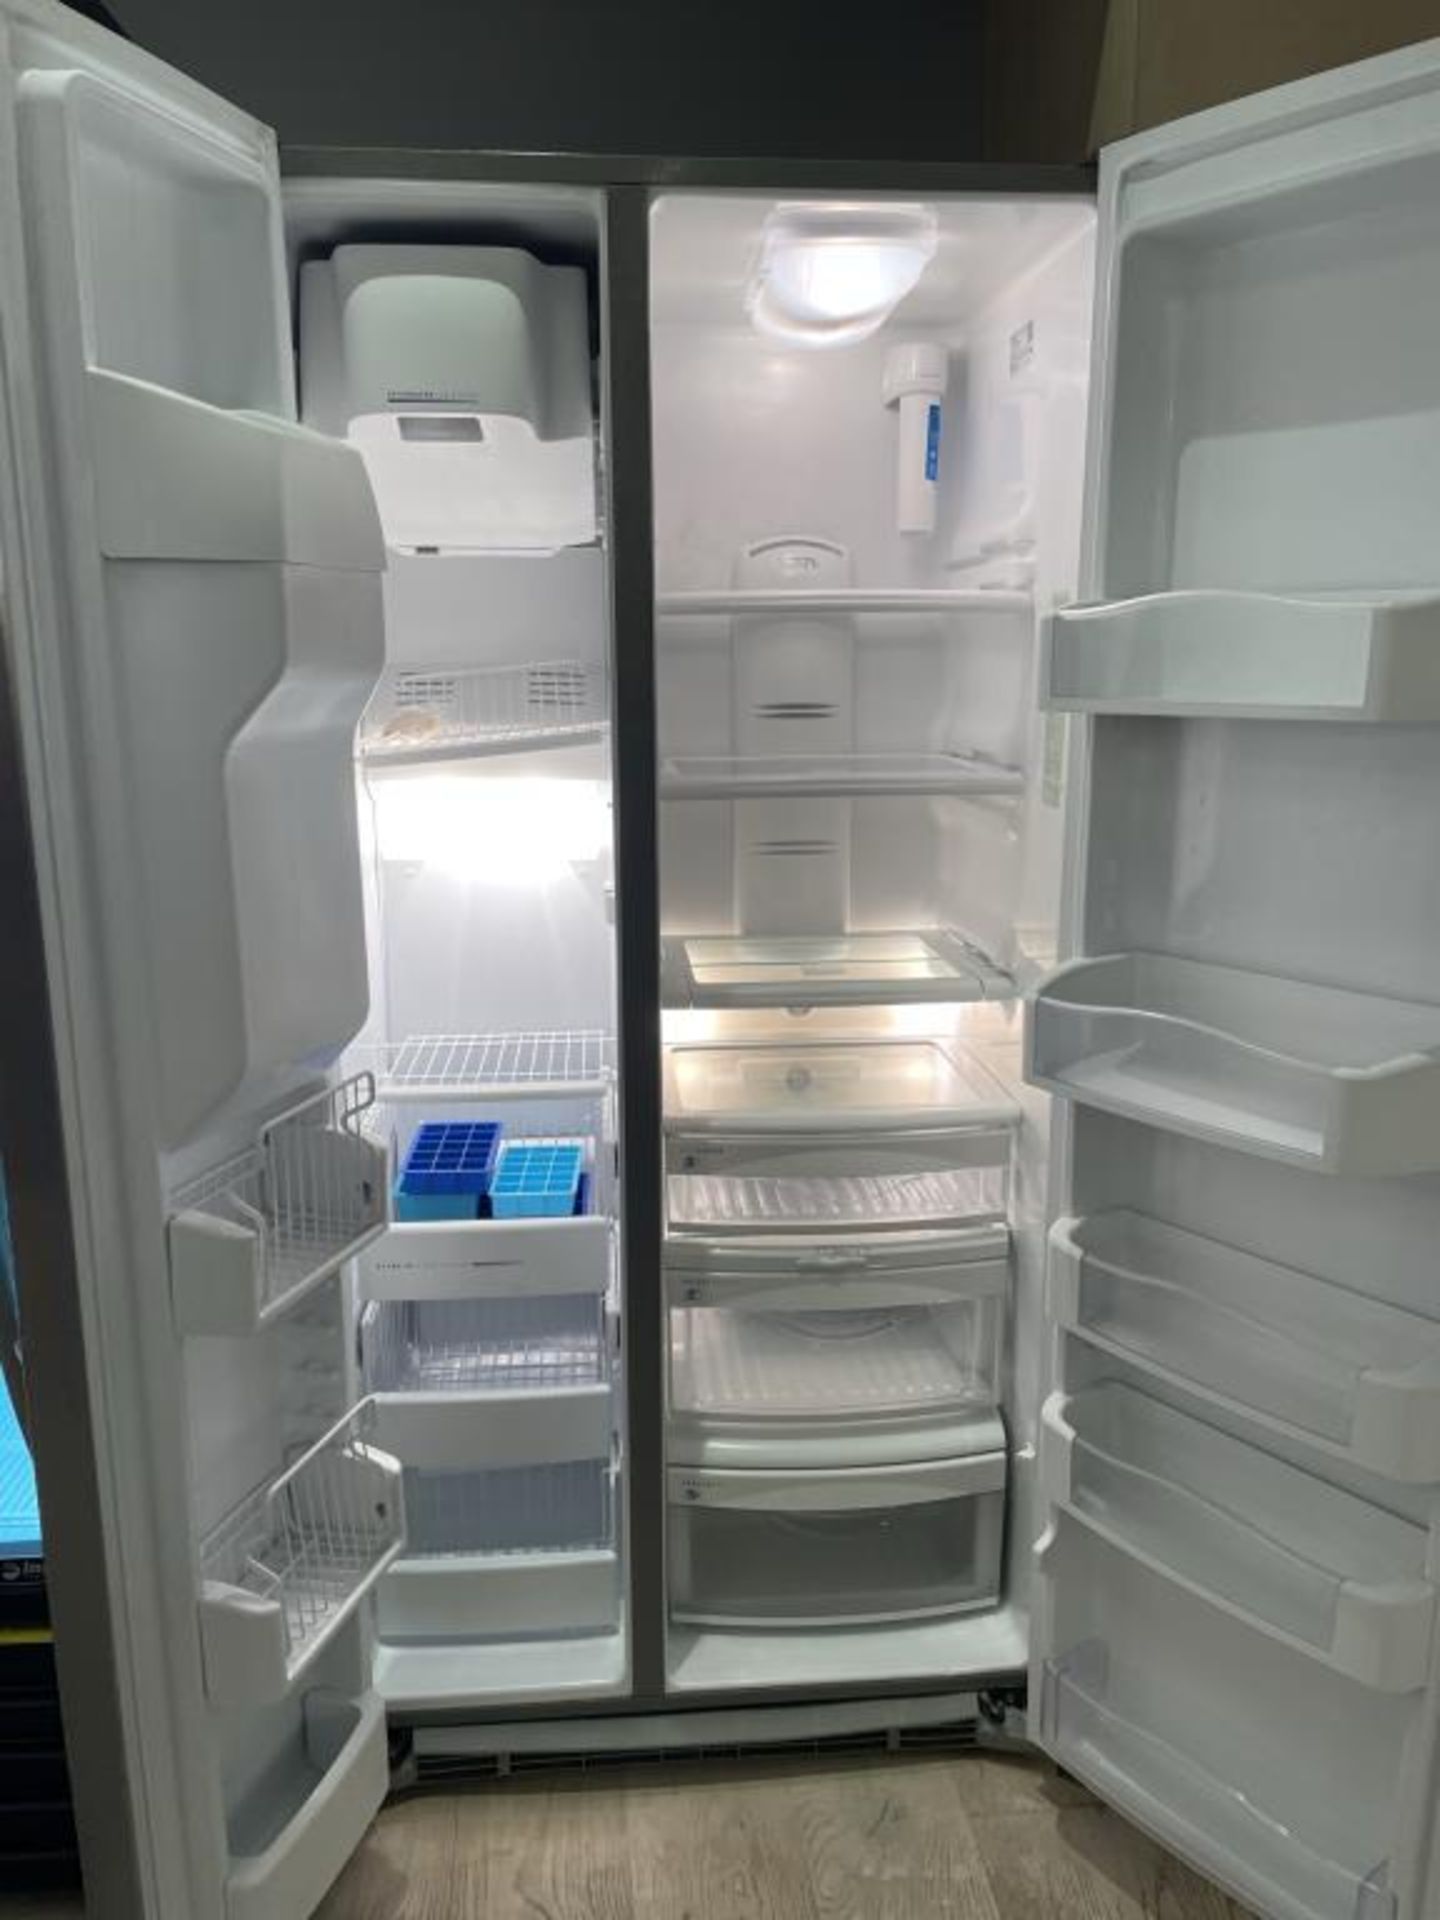 GE Profile PSCS5 Side by Side Refrigerator - Image 2 of 4